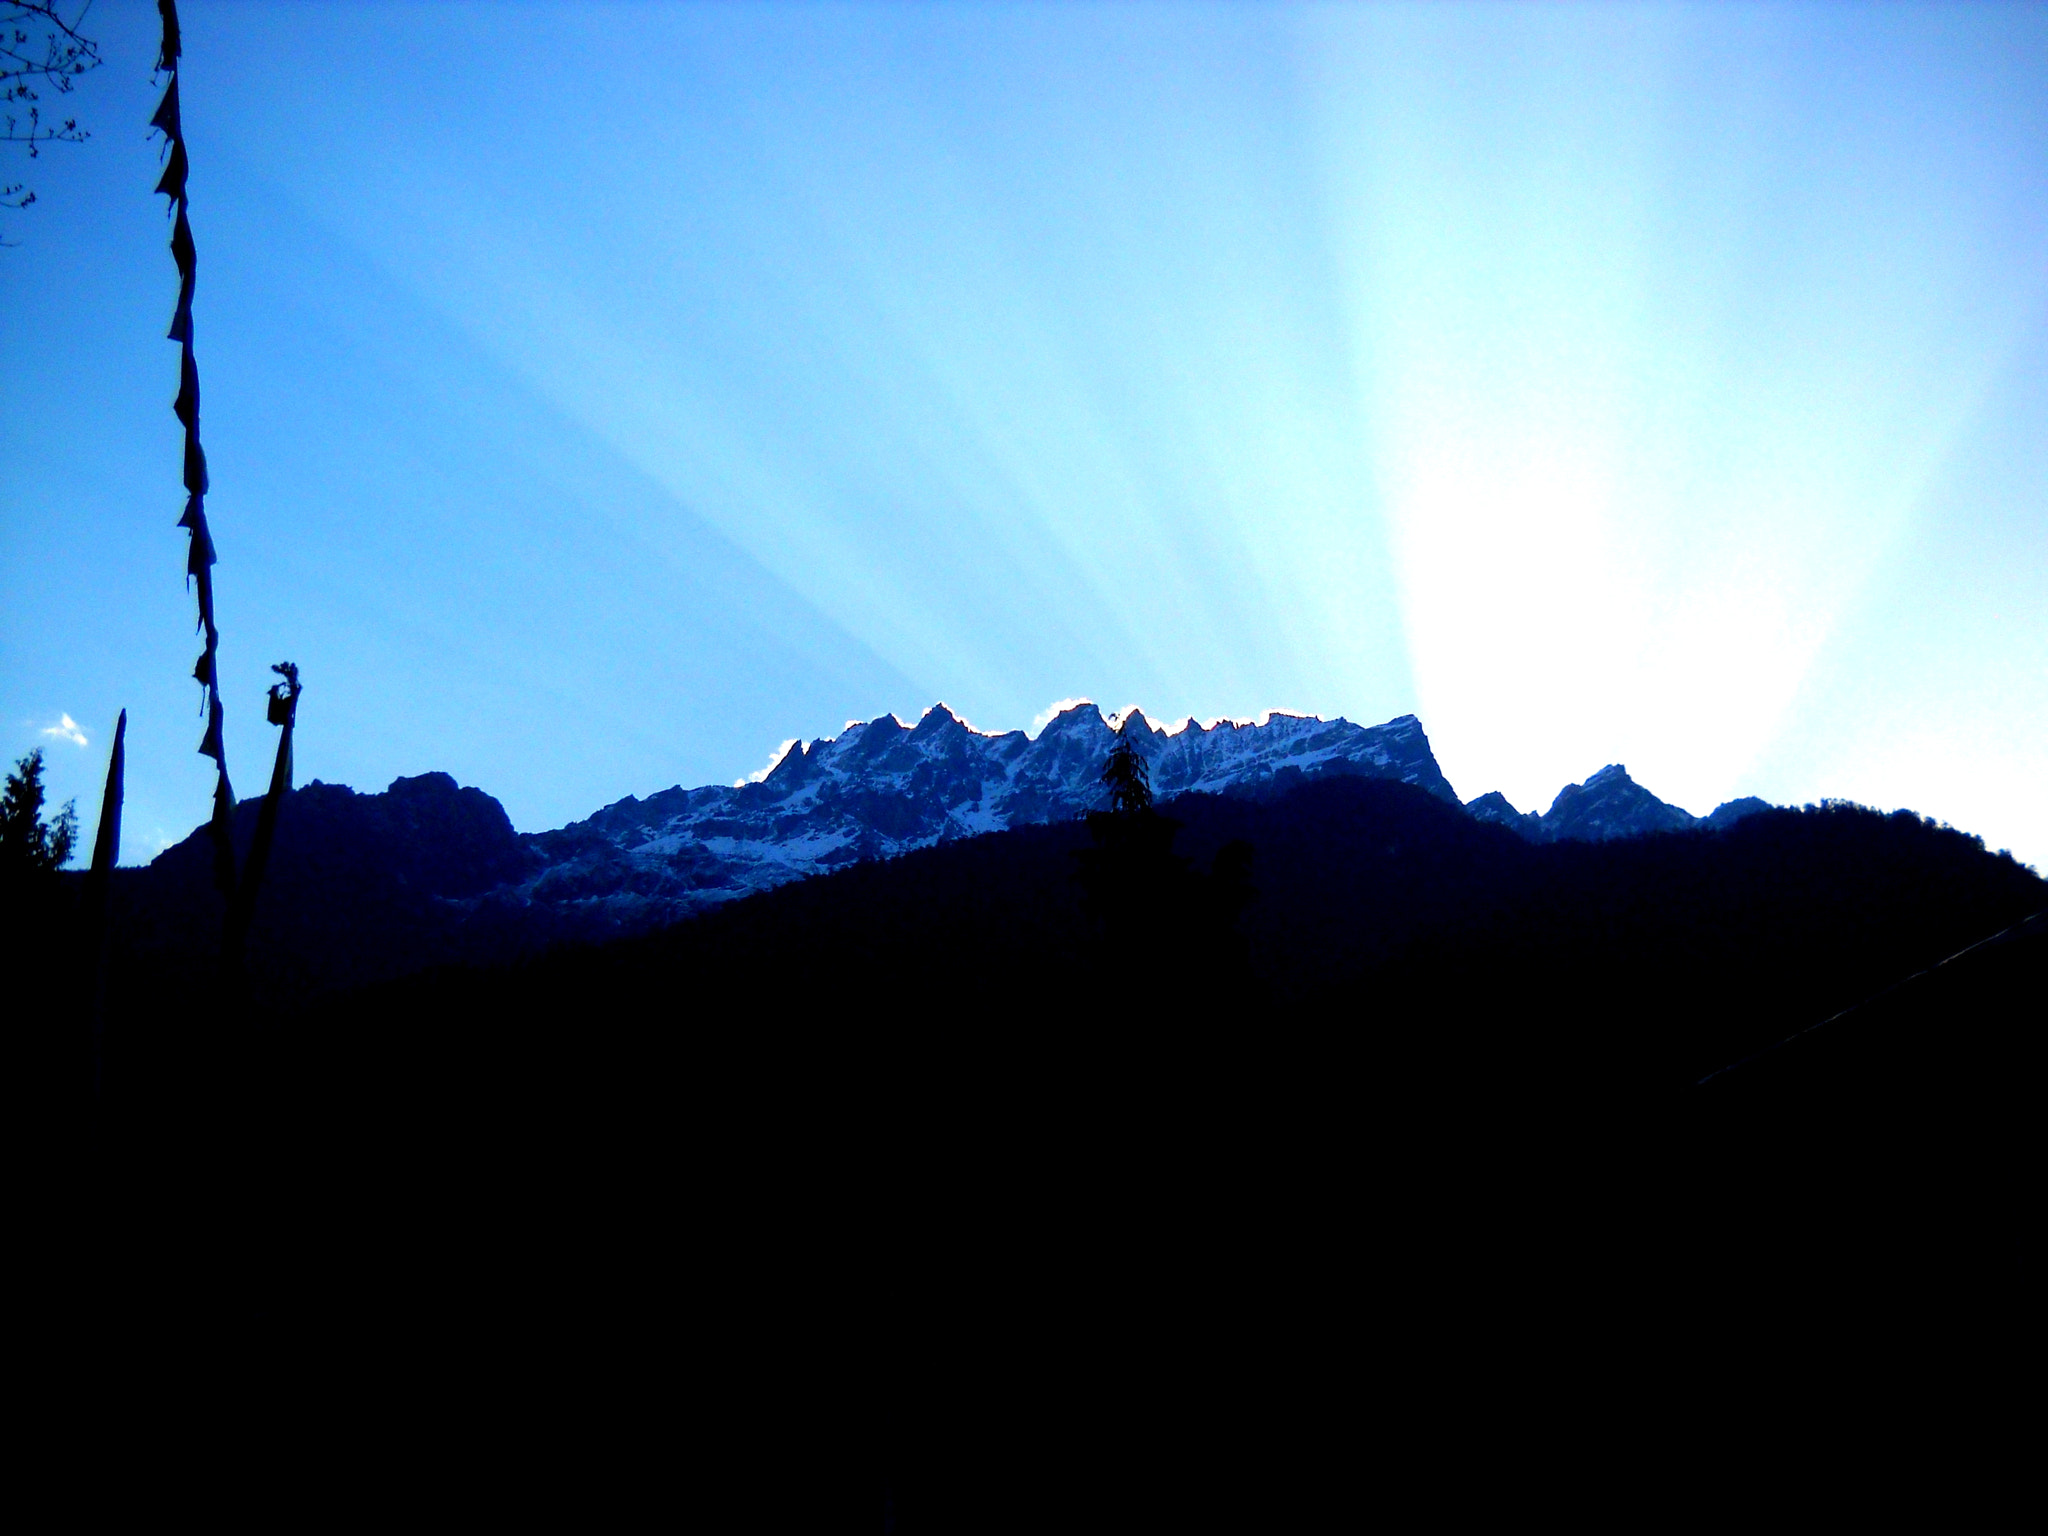 Nikon Coolpix L20 sample photo. Sunrise in yumthang, sikkim, india photography